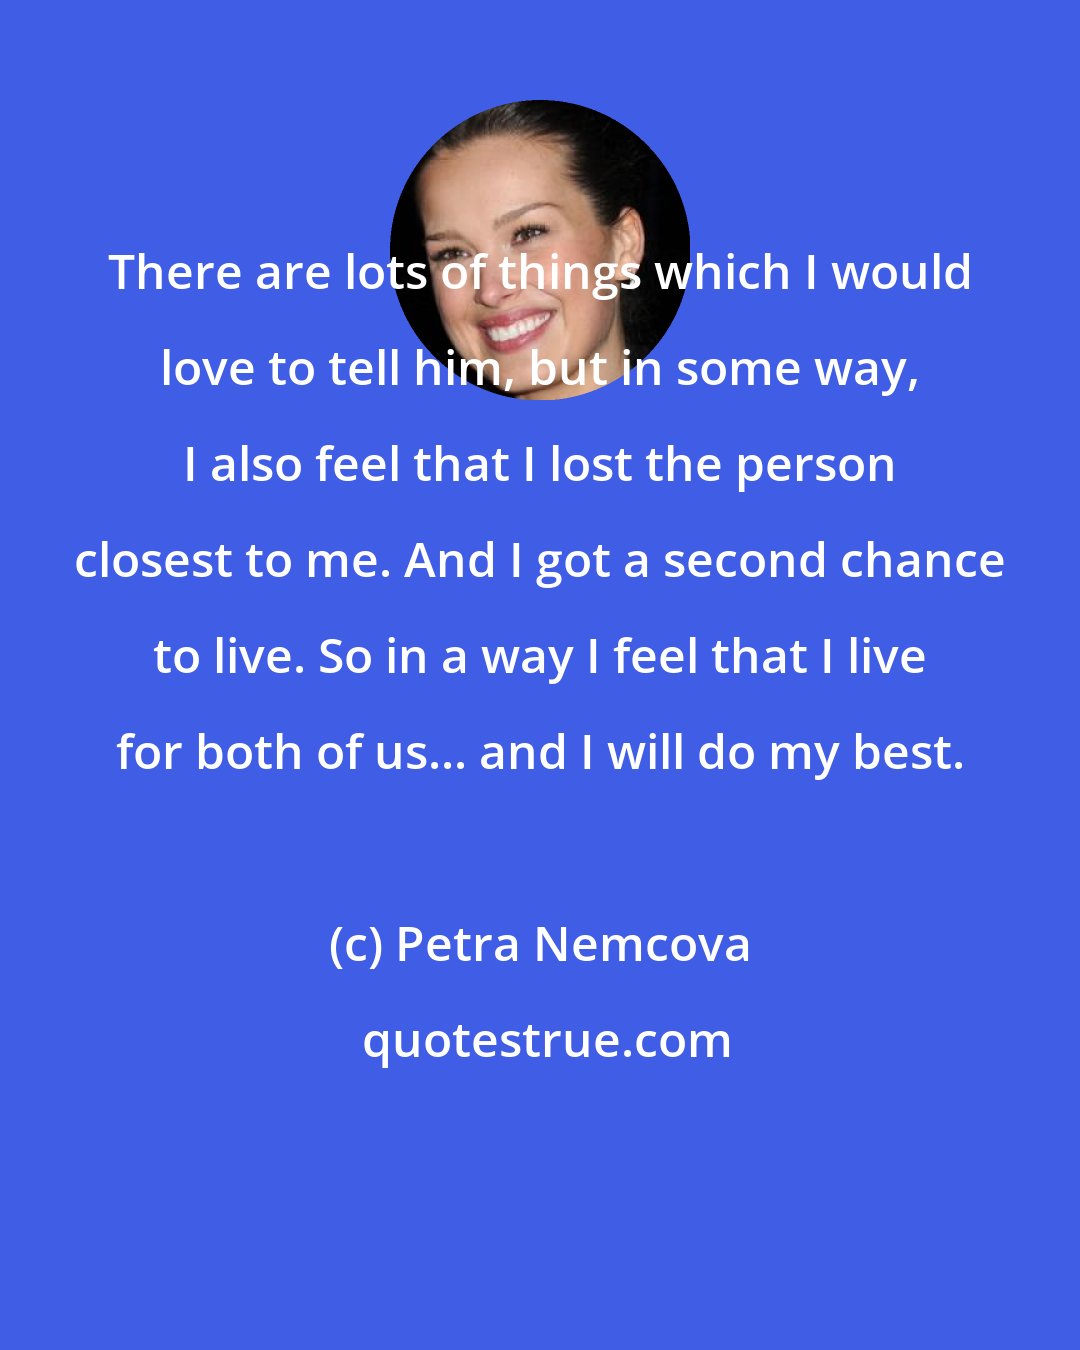 Petra Nemcova: There are lots of things which I would love to tell him, but in some way, I also feel that I lost the person closest to me. And I got a second chance to live. So in a way I feel that I live for both of us... and I will do my best.